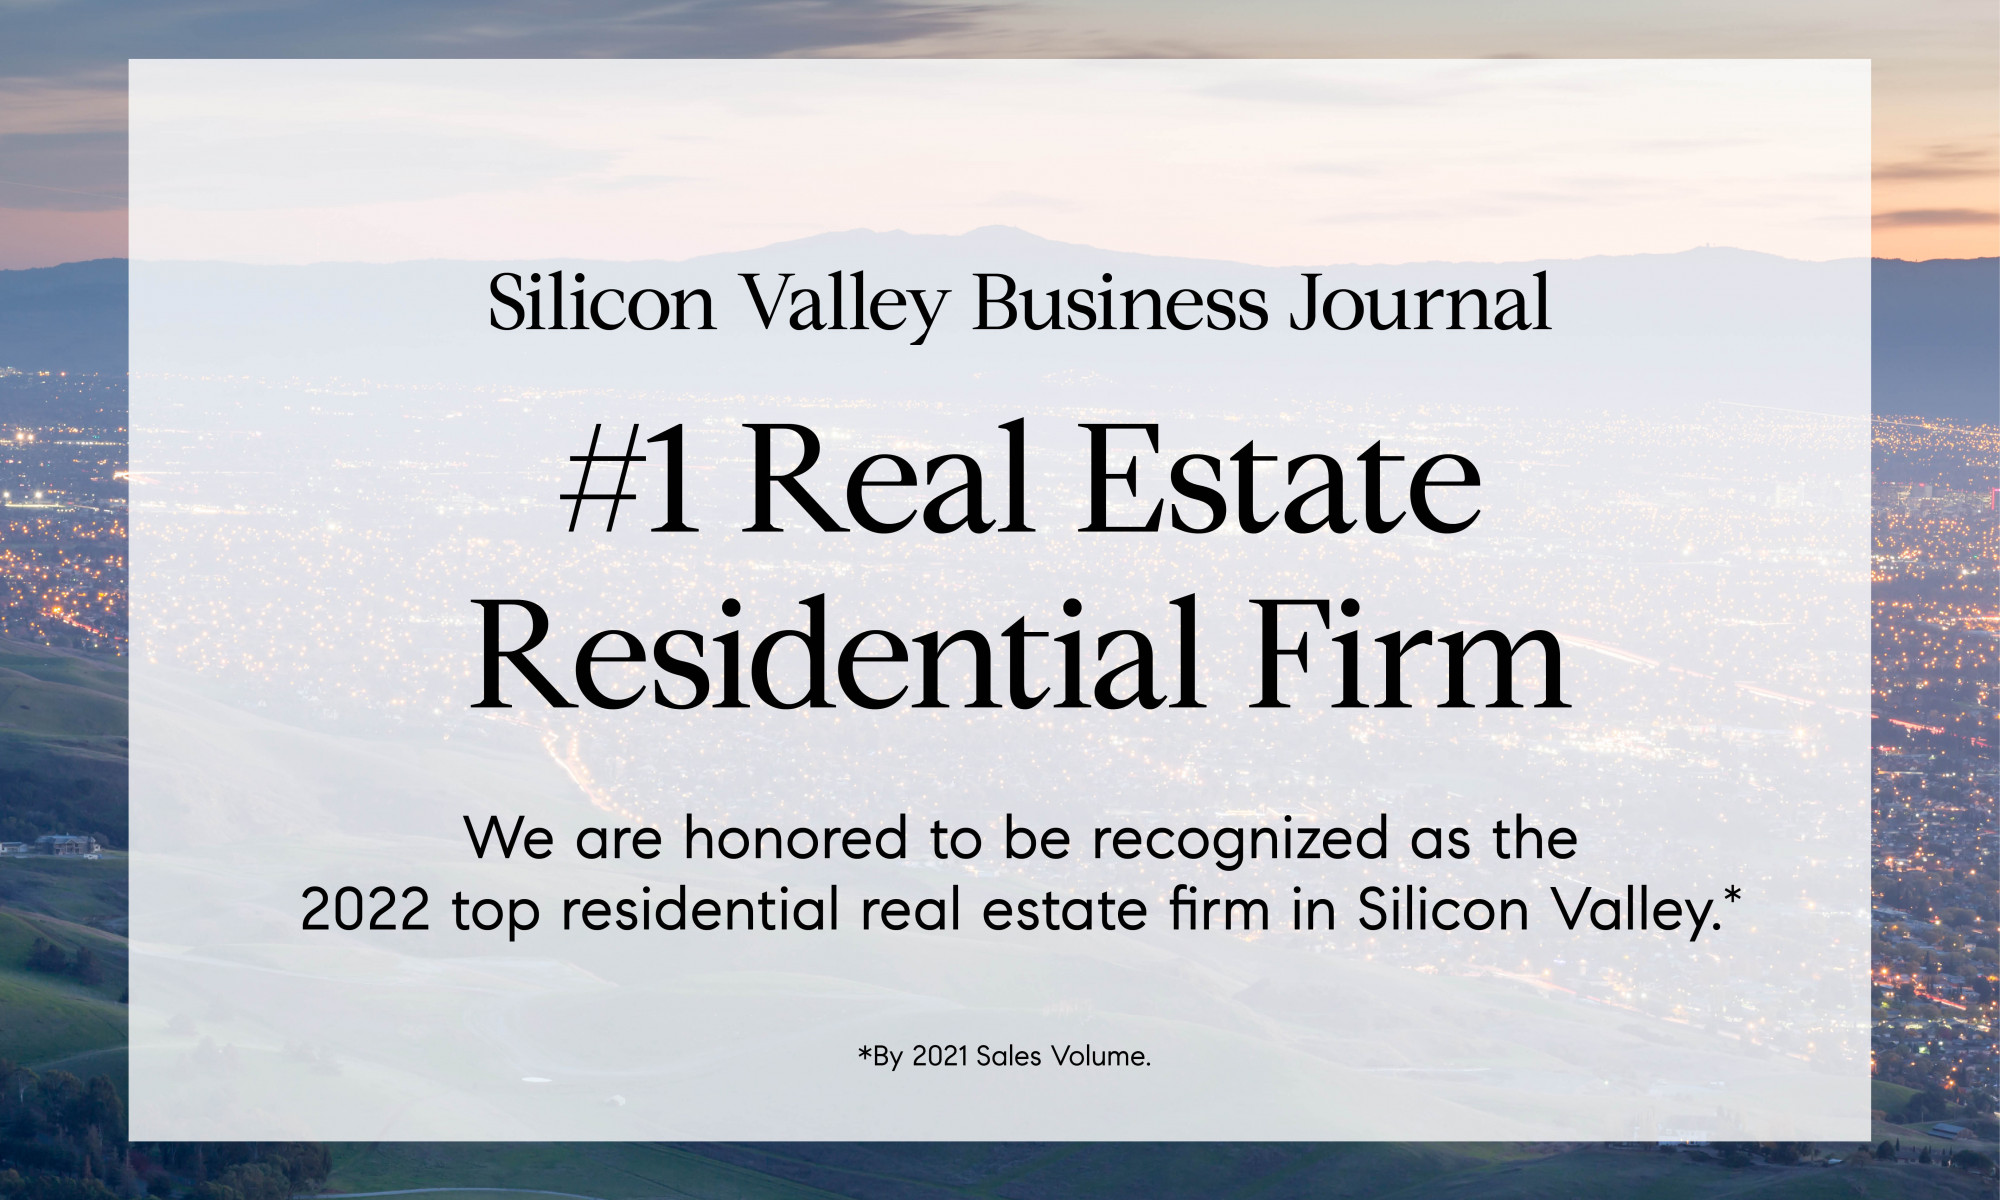 Silicon Valley Business Journal names Compass the #1 Residential Real Estate Firm in Silicon Valley